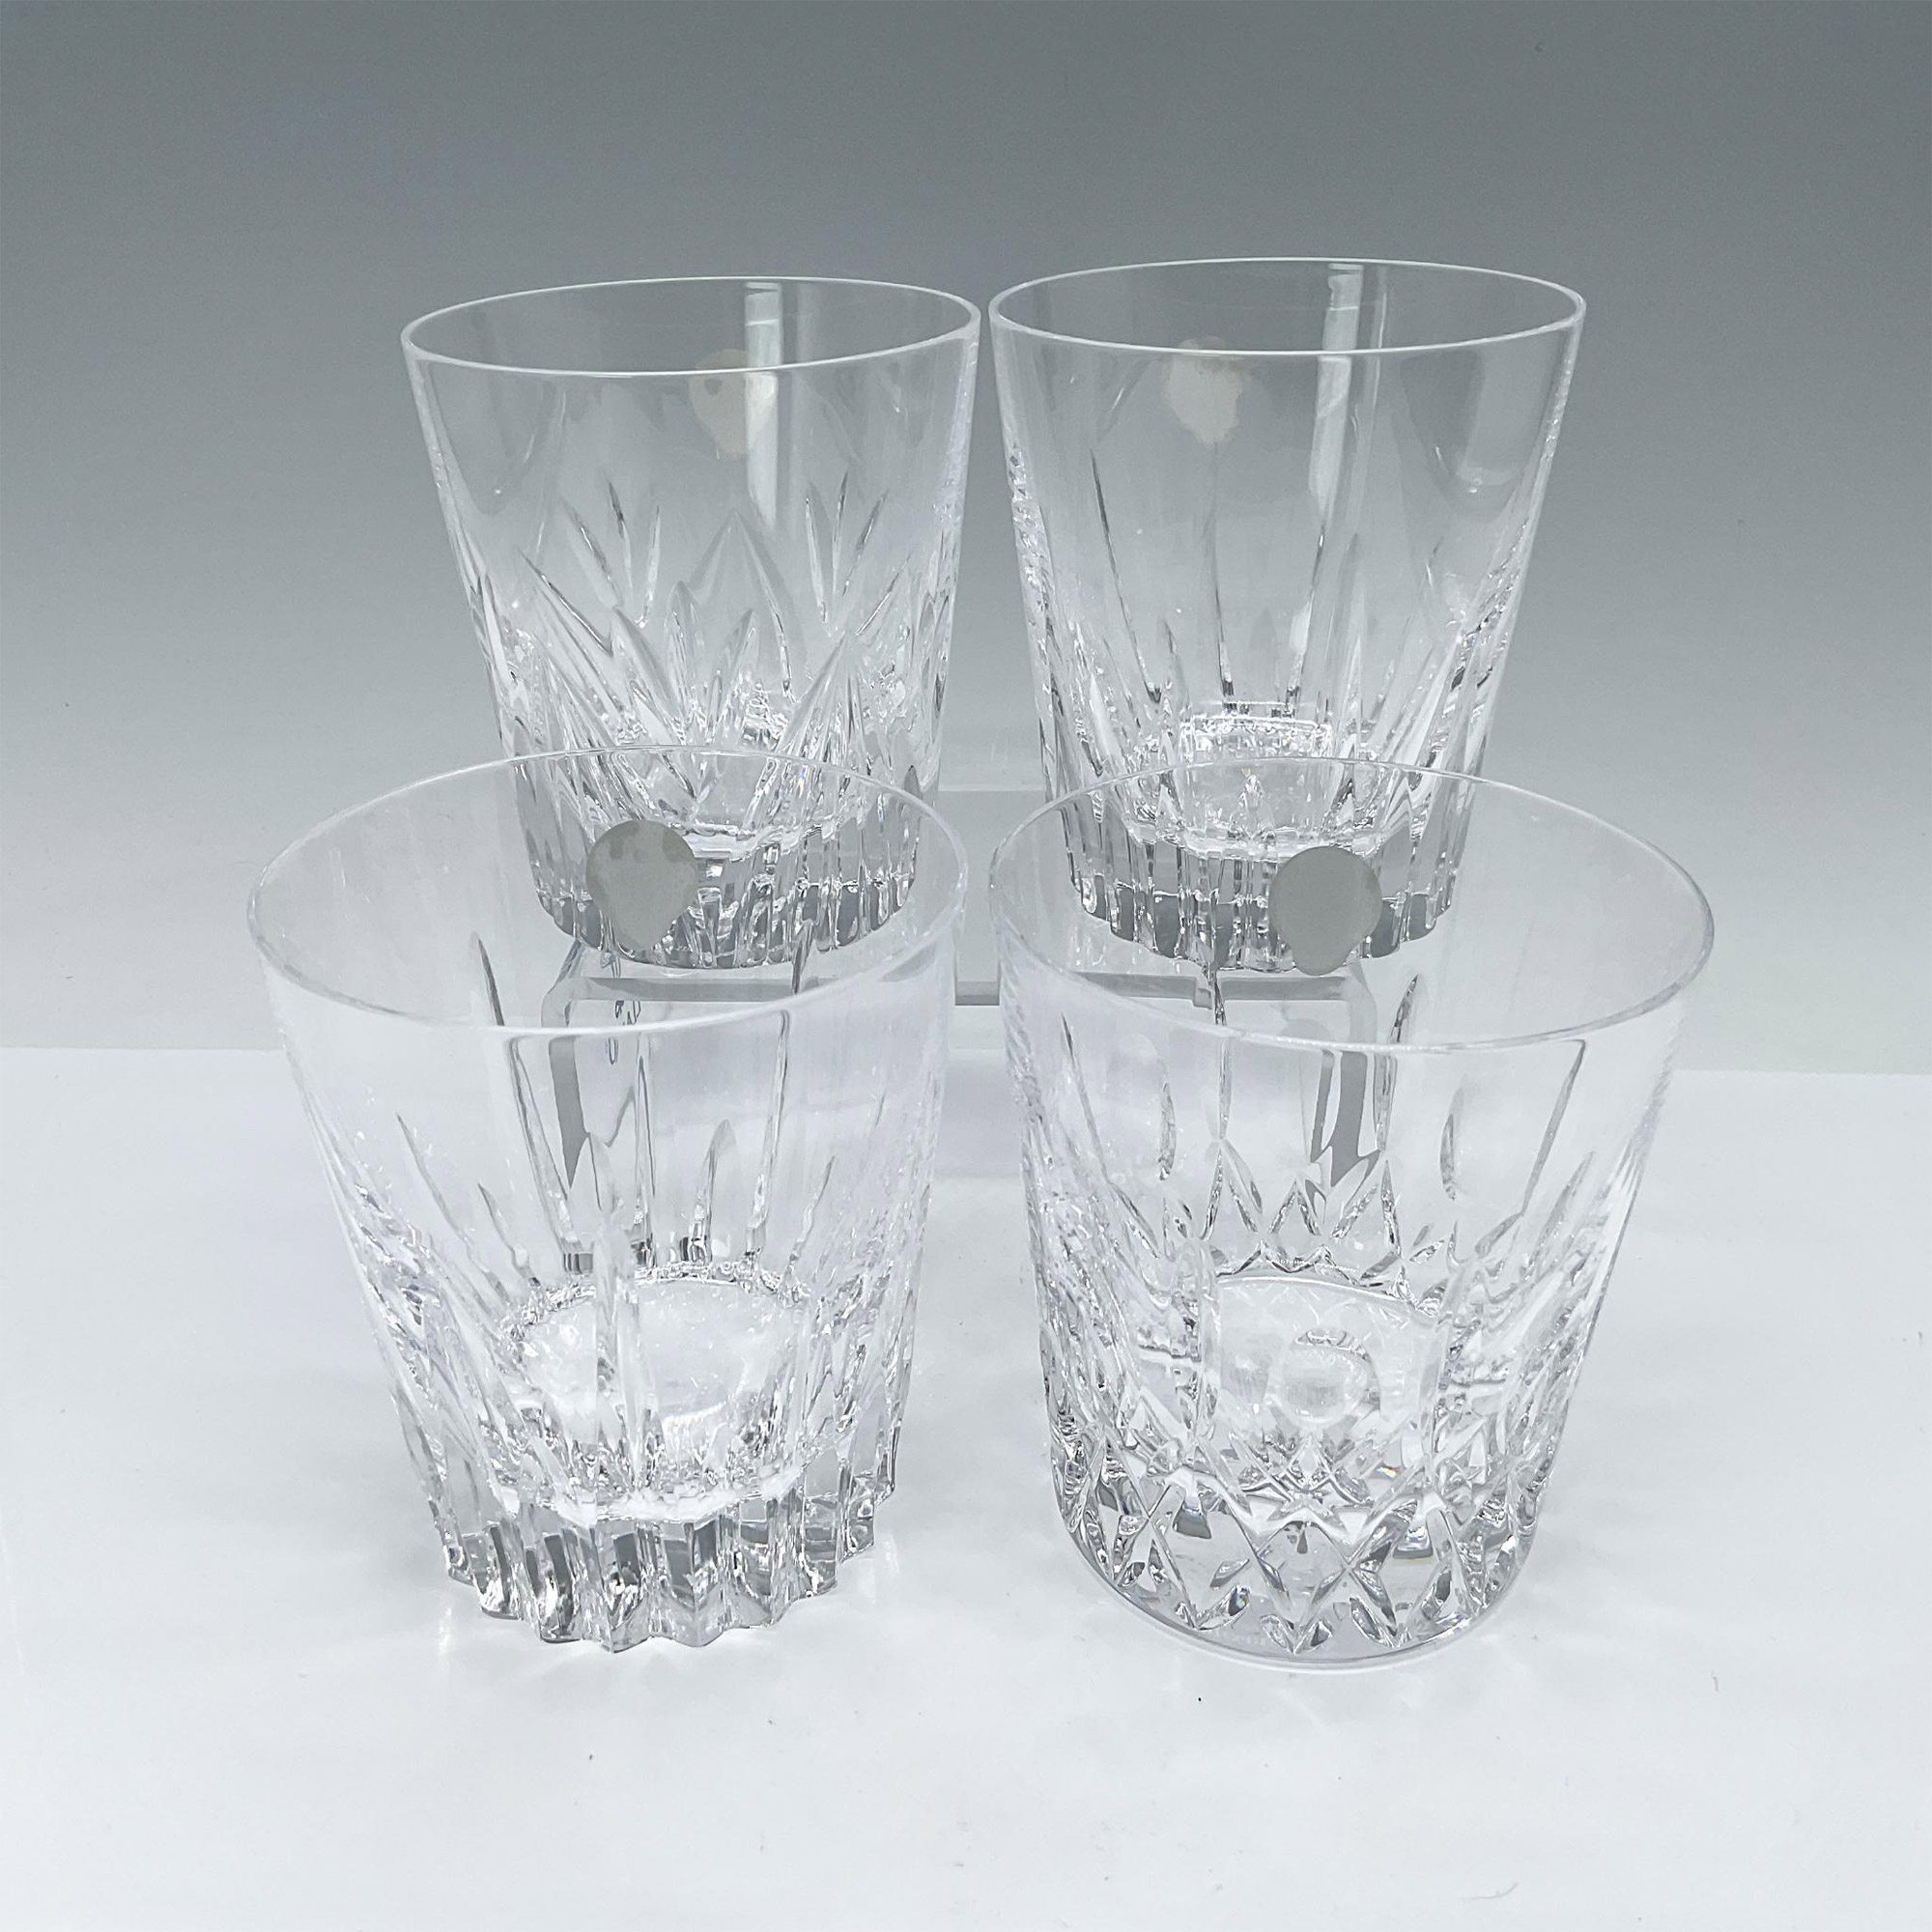 4pc Waterford Crystal Rocks Glasses, Mixed Patterns Set - Image 2 of 4